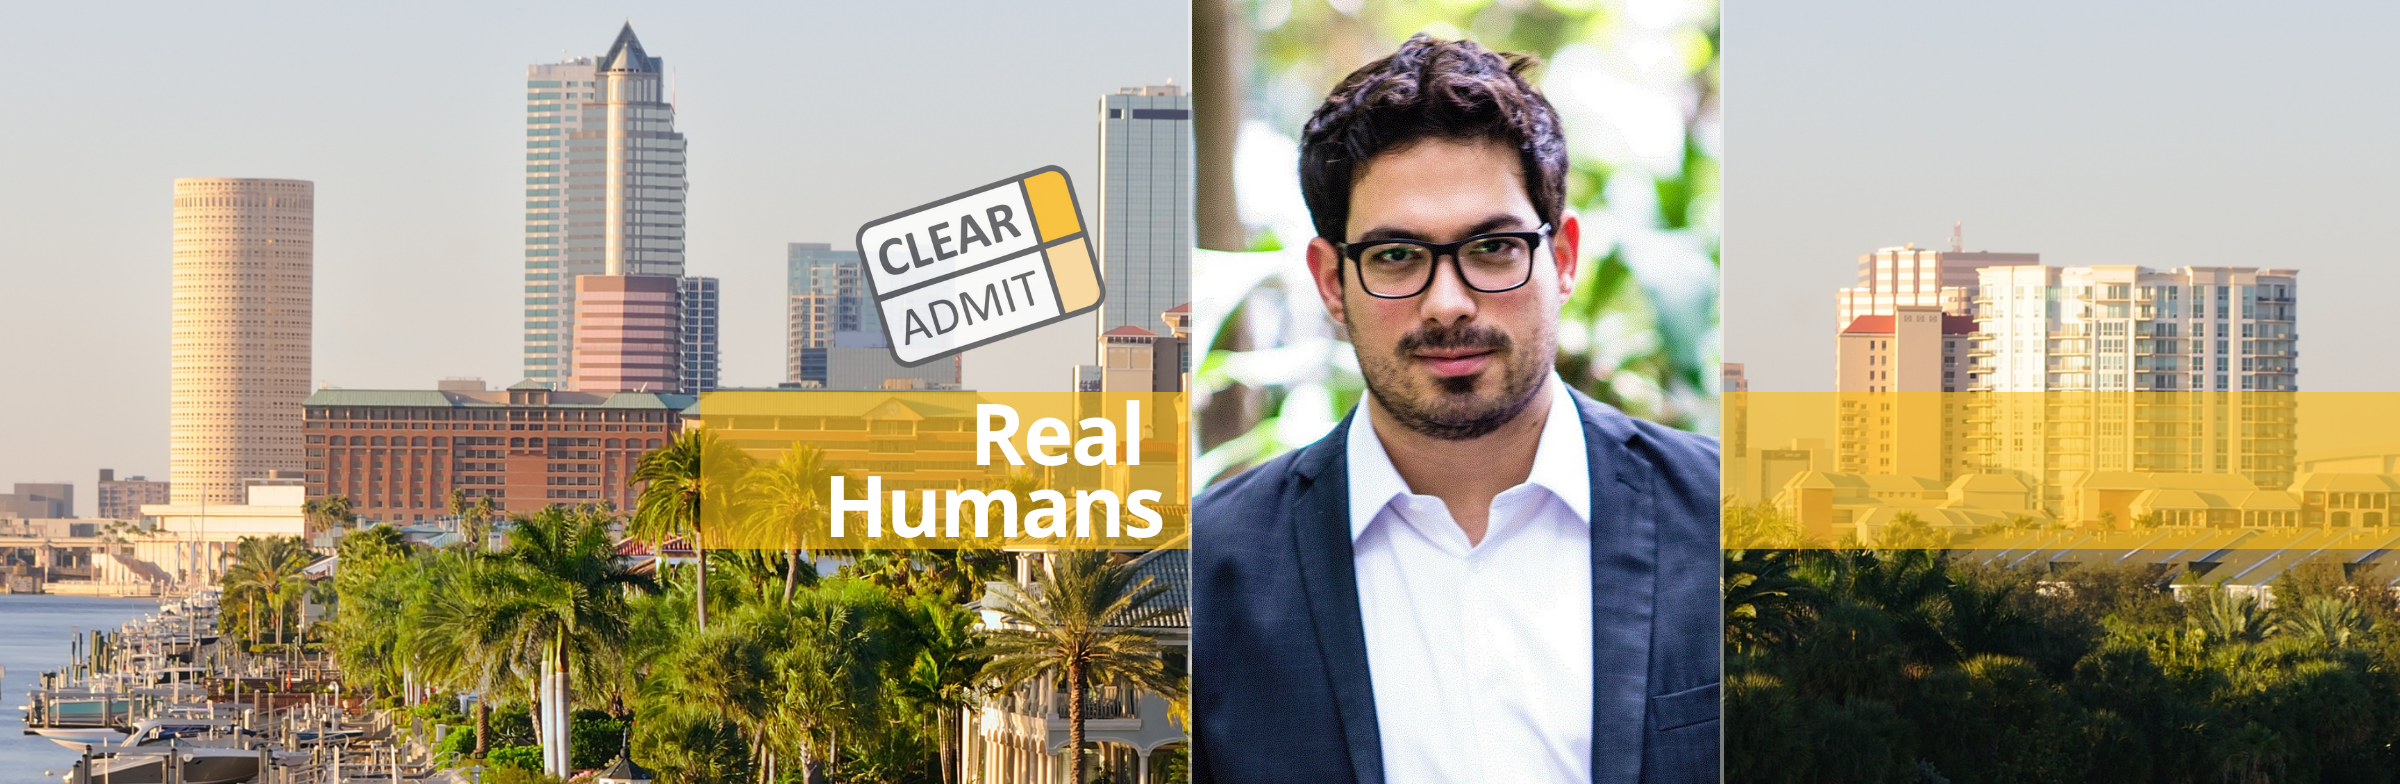 Image for Real Humans of Amazon: Marcos Coppa, Michigan Ross MBA ’21, Pathways Operations Manager